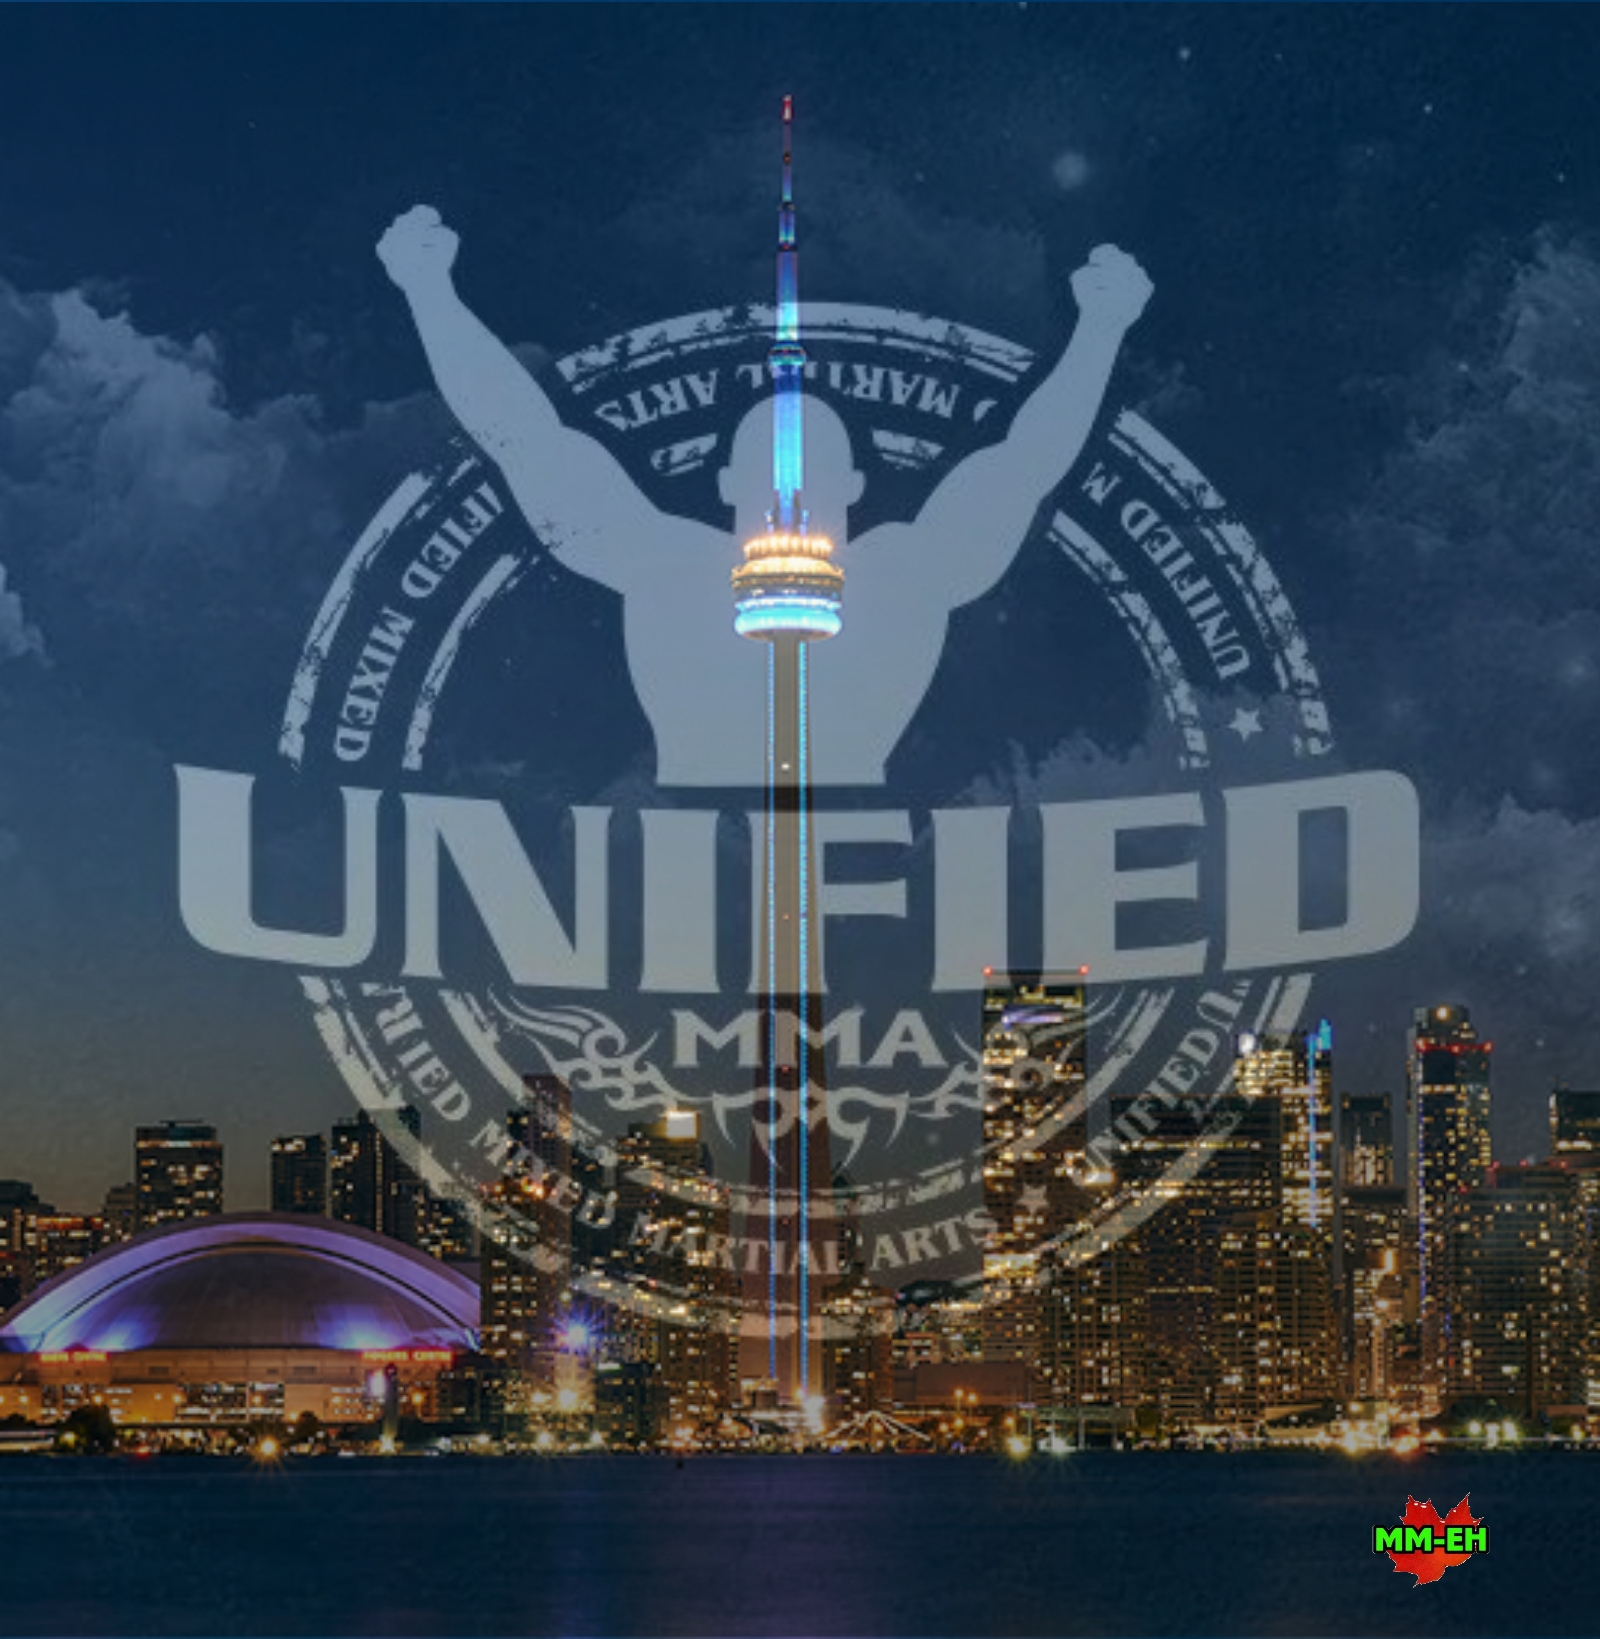 Unified MMA Toronto - MM-eh